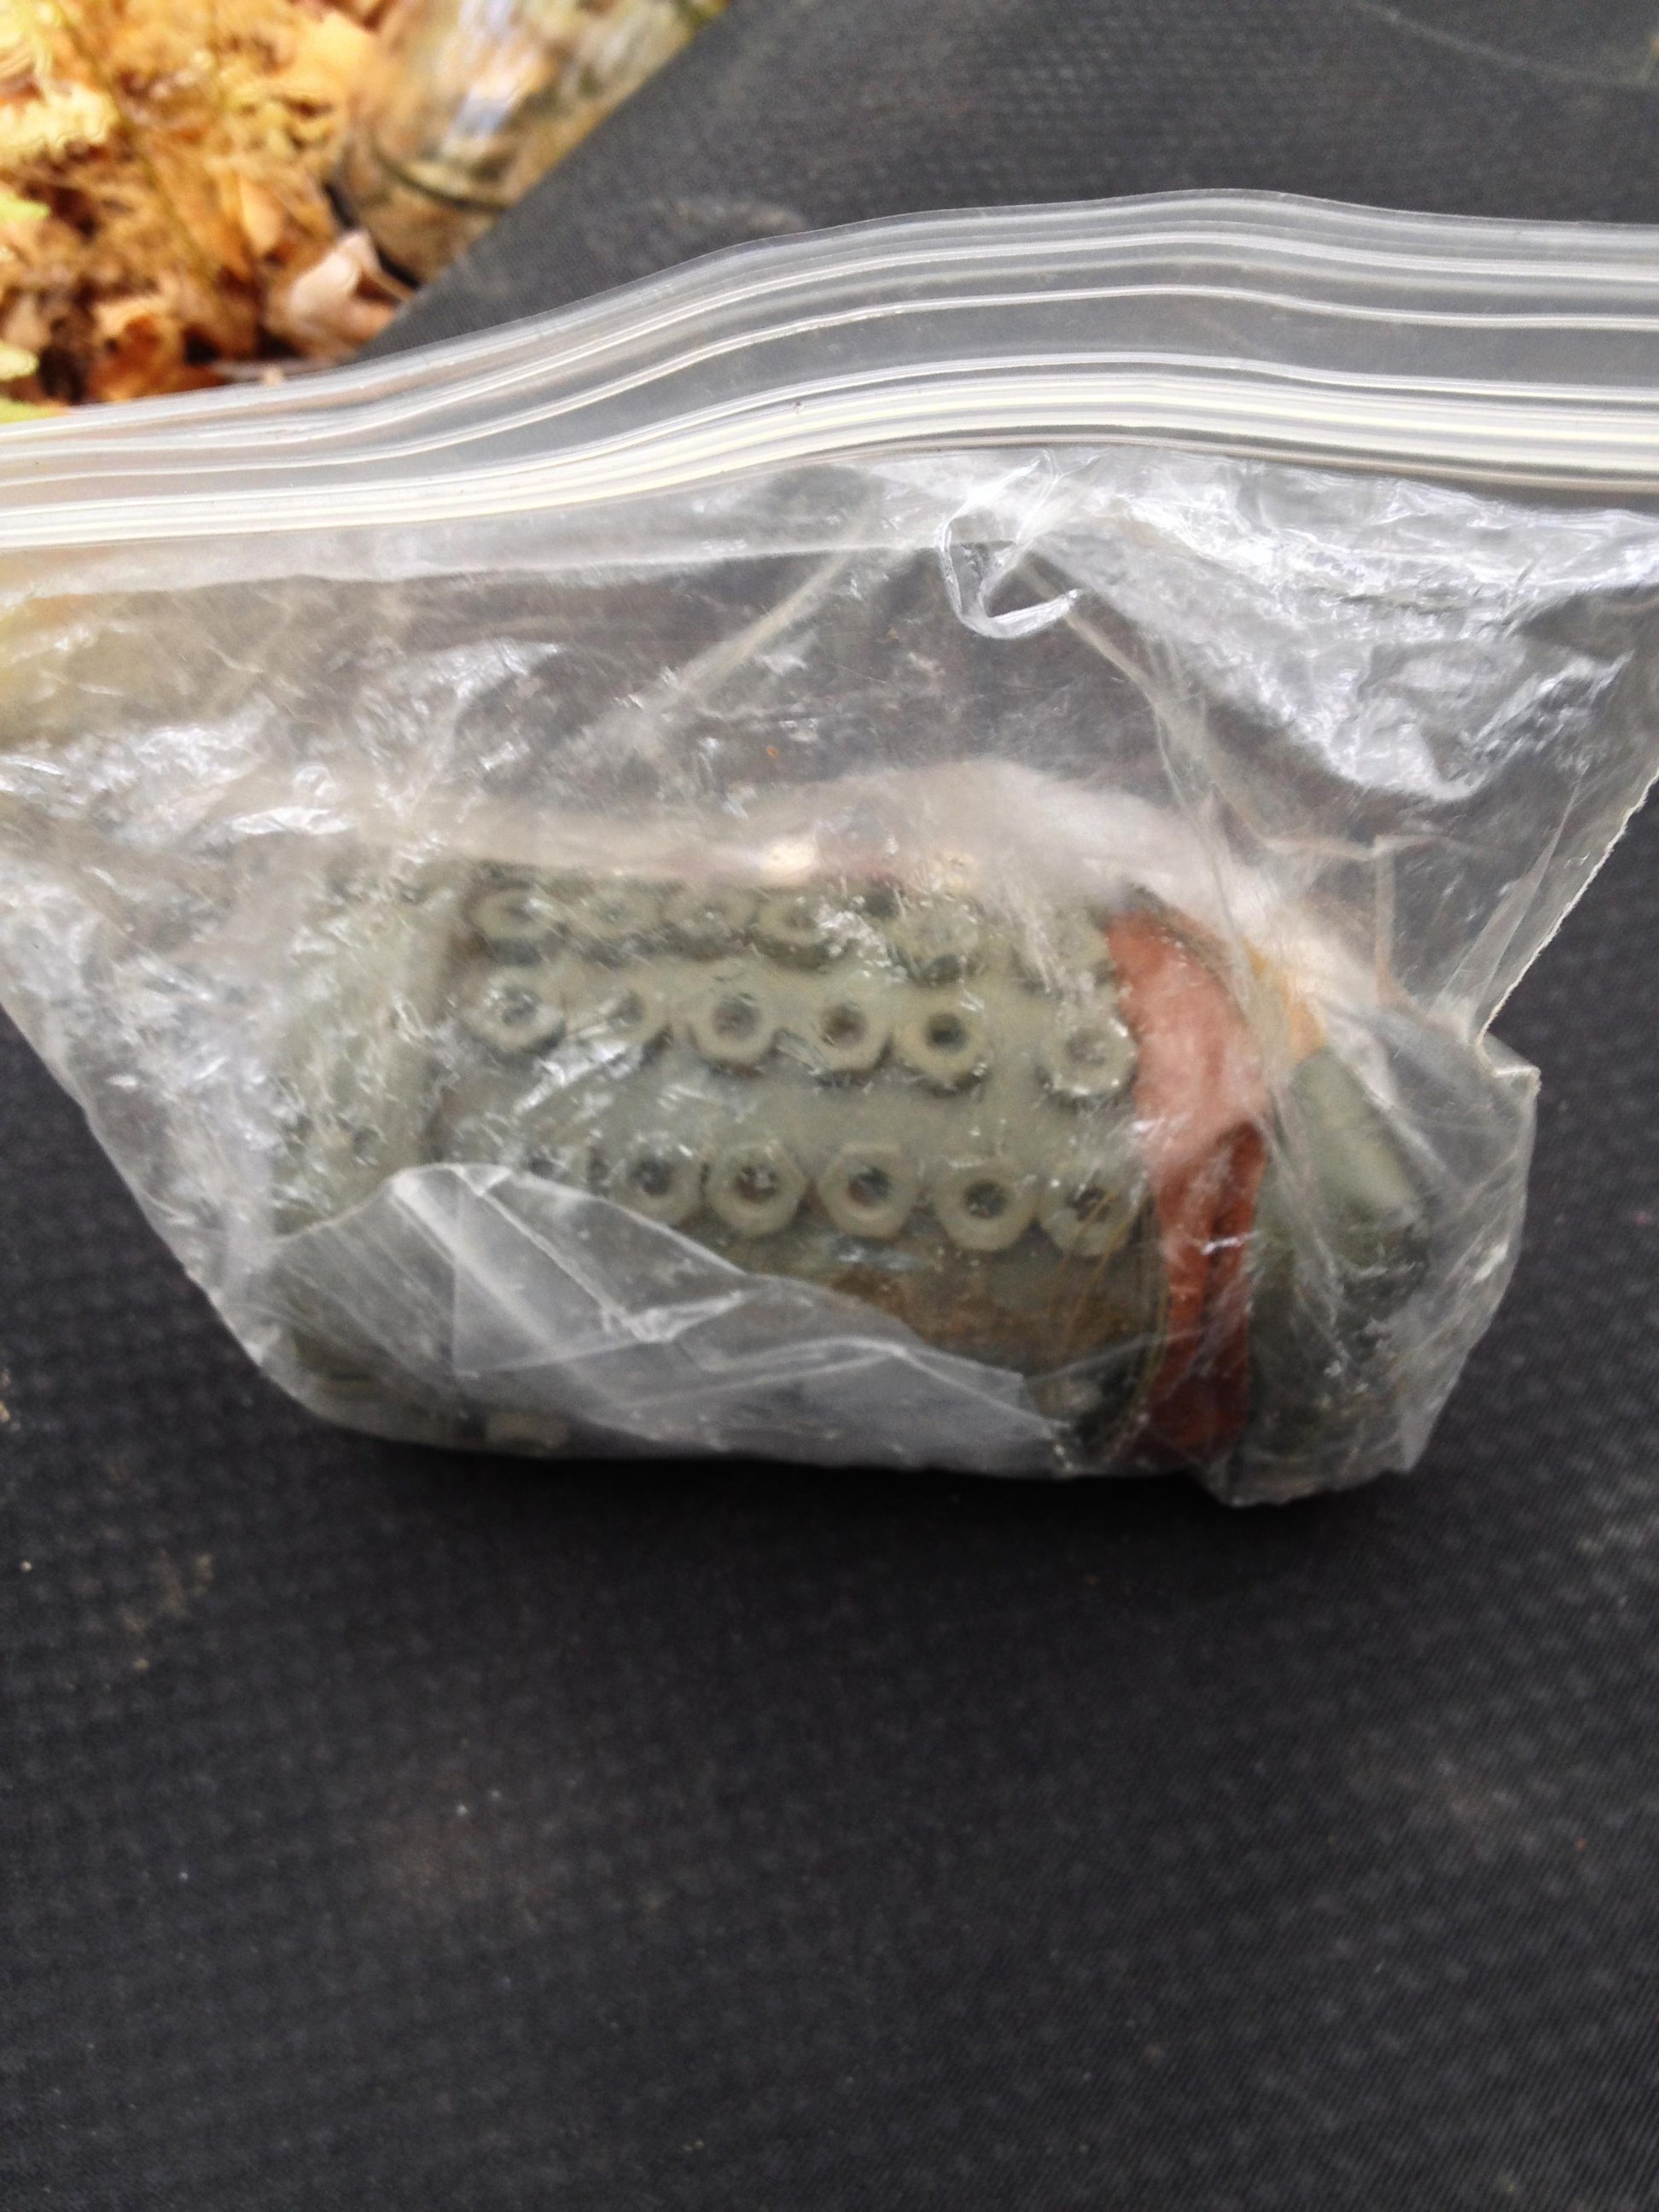 PHOTO: One of the pipe bombs police found in the ongoing manhunt for cop shooting suspect Eric Frein.